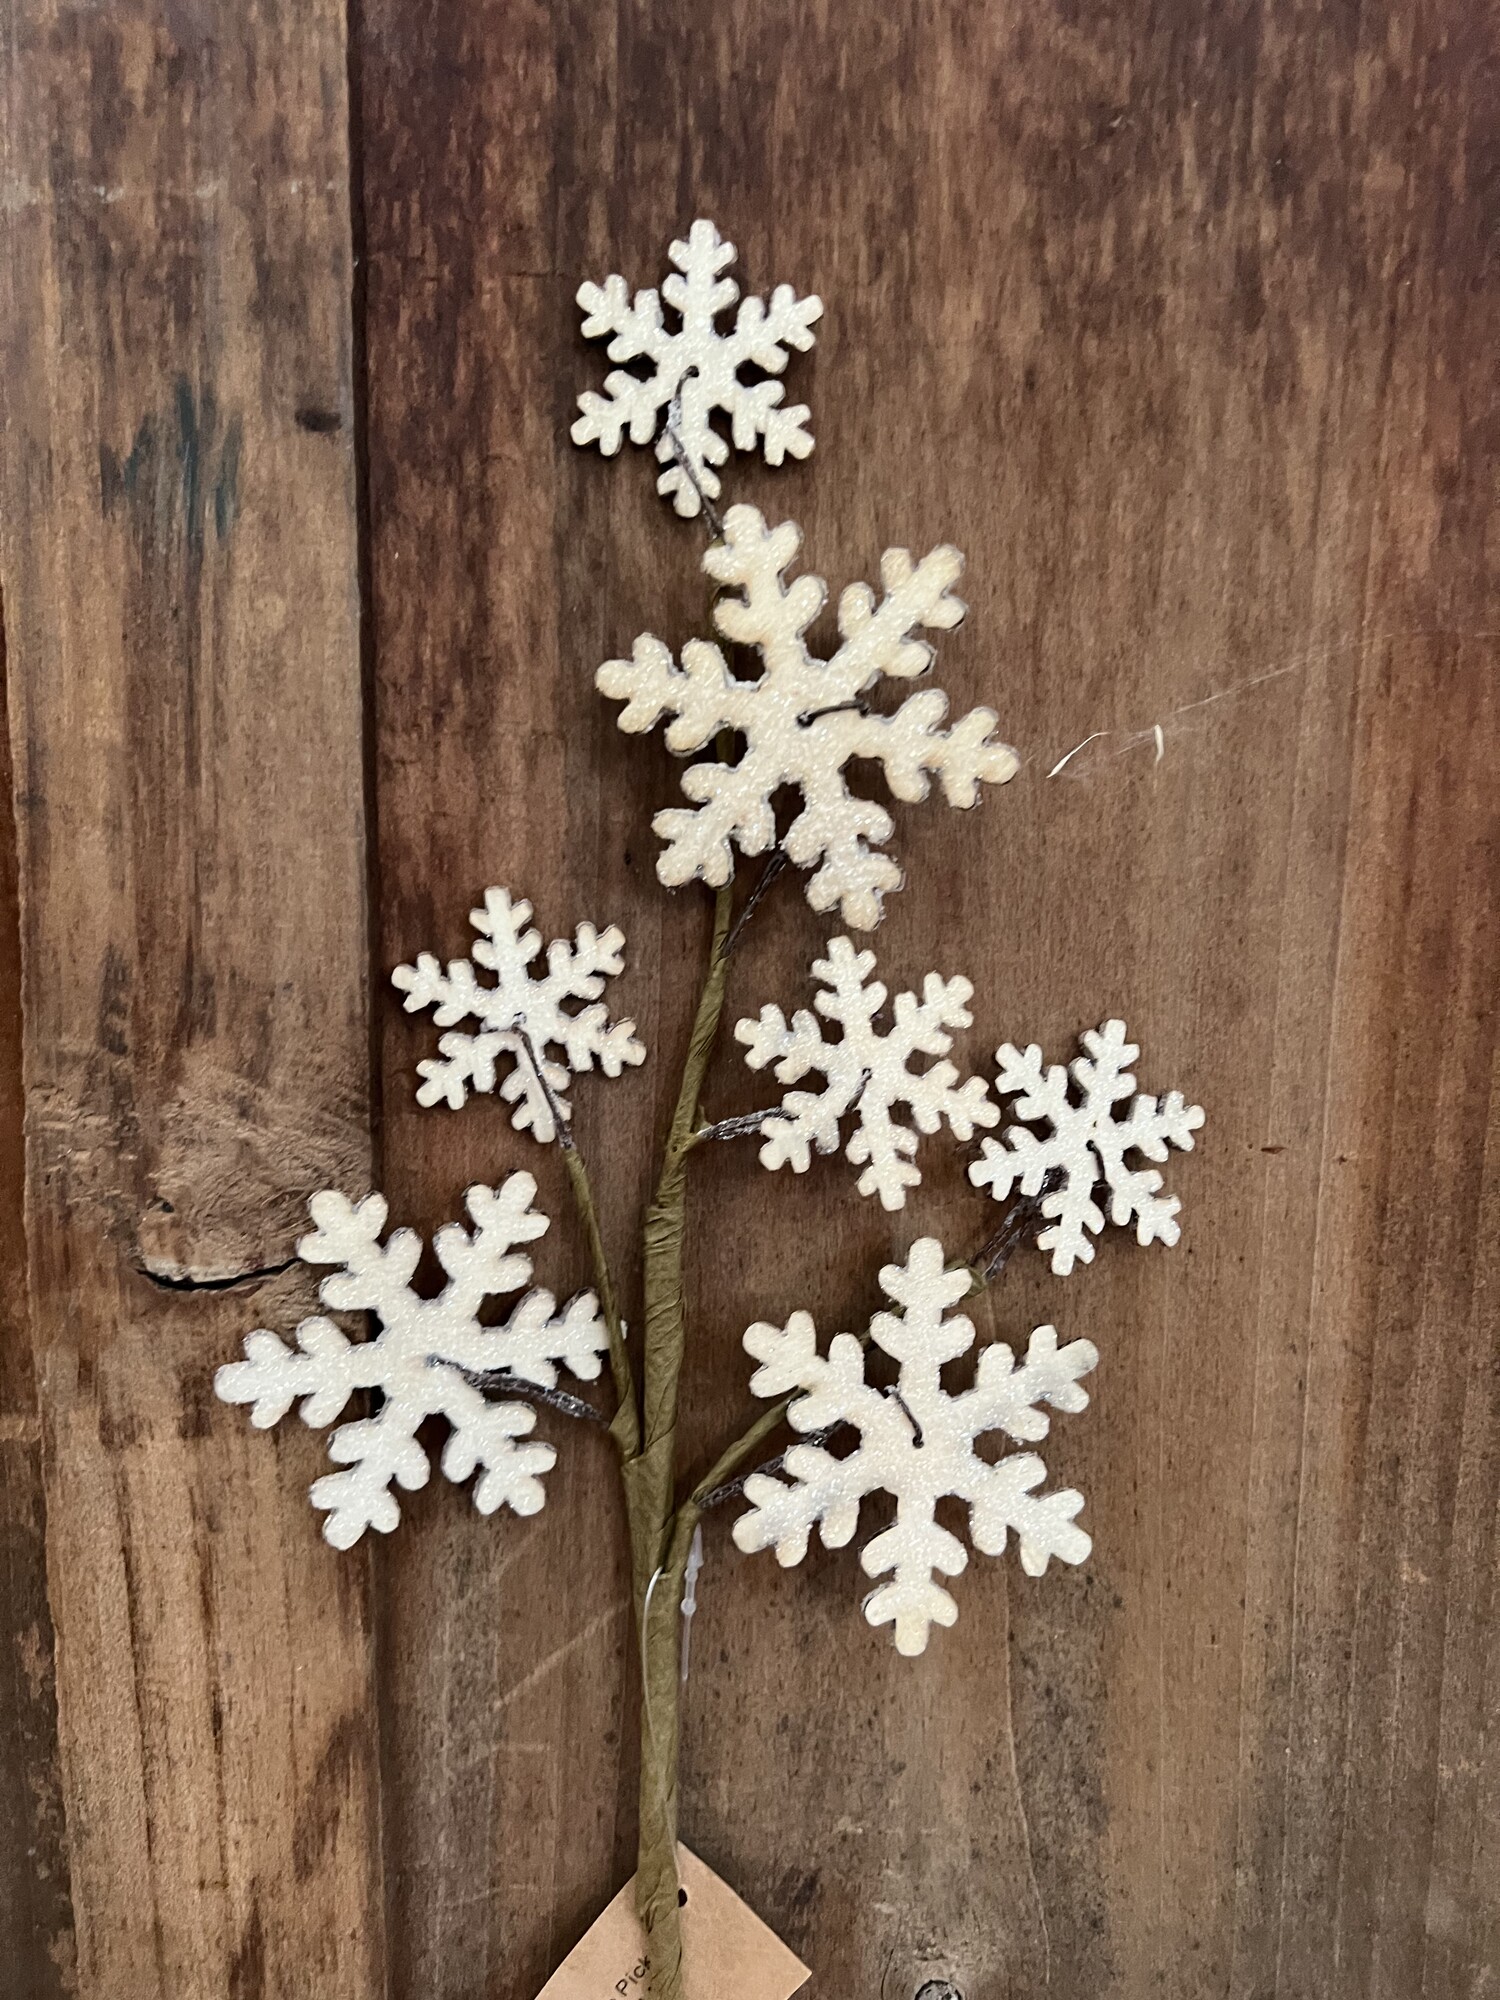 Wooden Snowflake pick is a festive winter floral that has an array of wooden cutout snowflakes on a brown-wrapped floral stem. The snowflakes are heavily coated with glitter for an icy sparkle
Simply place pick in a floral vase or pitcher to complete the look. Measures 13 inches high